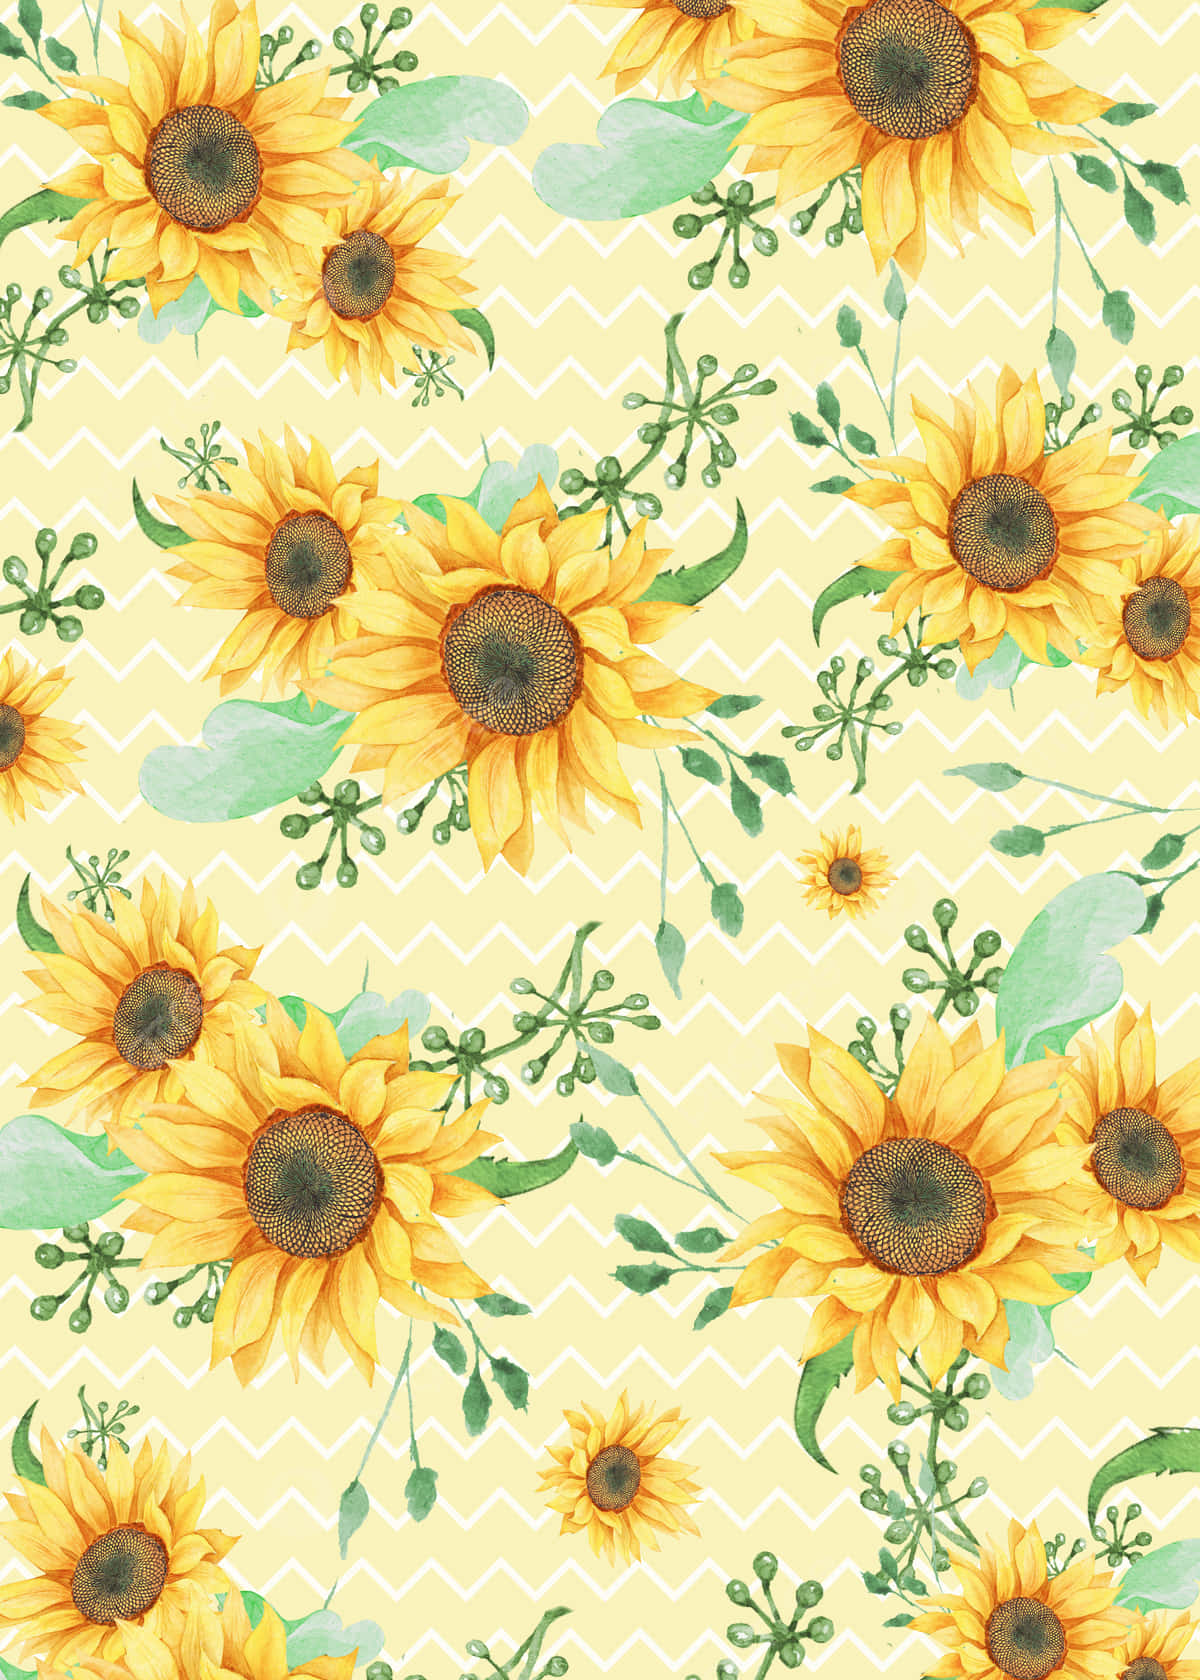 Zigzag Lines With Sunflower Phone Wallpaper